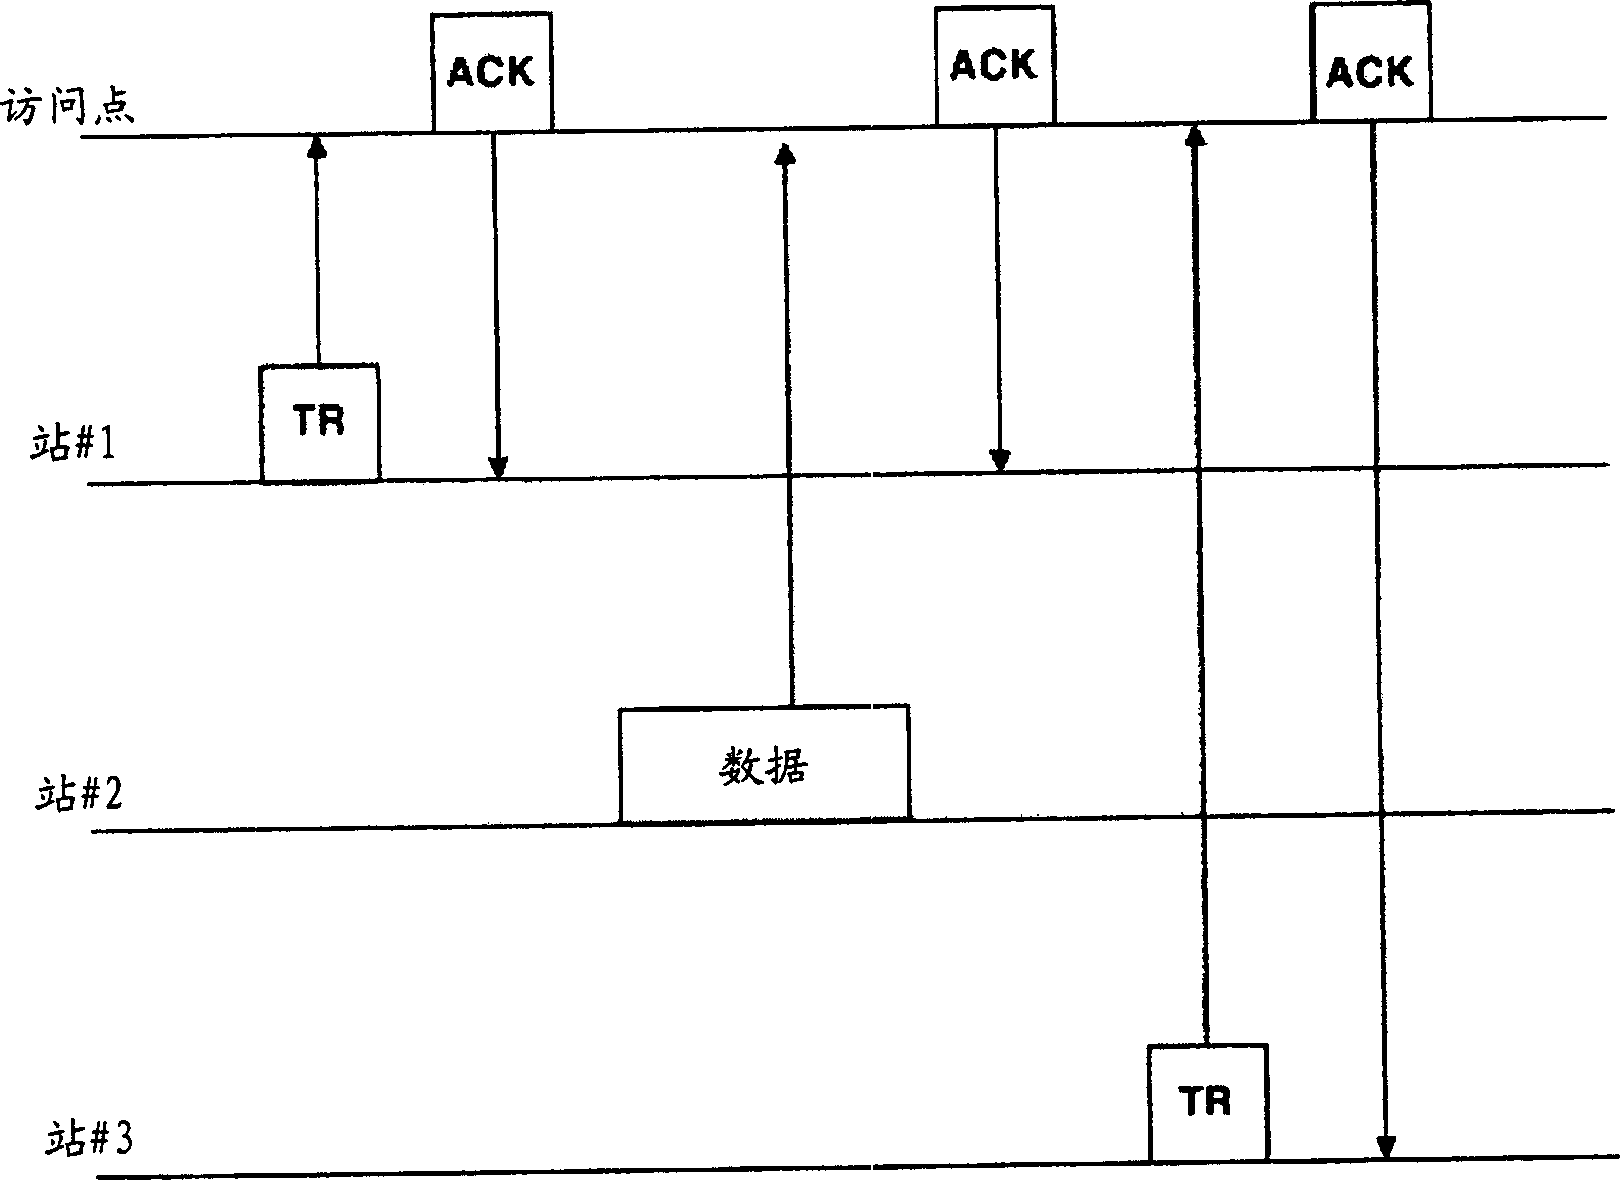 Method and system for wireless local area network (lan) communication using virtual time division multiple access (tdma)